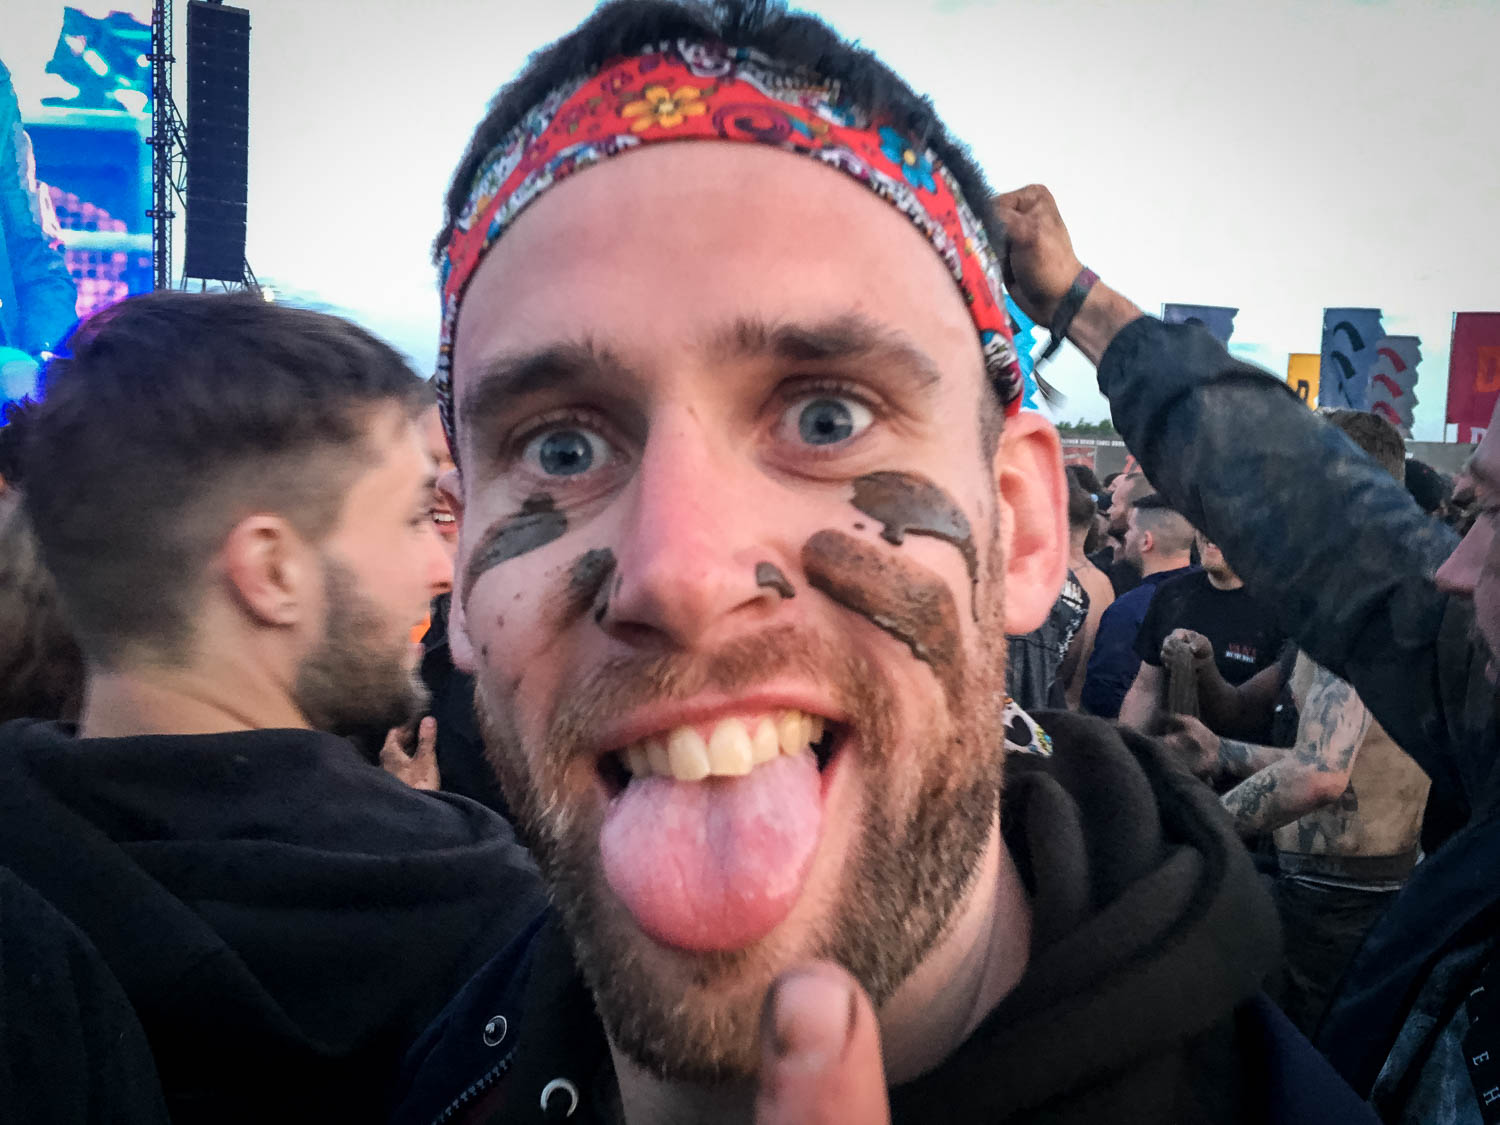  Fan going to war with during the Slipknot set 